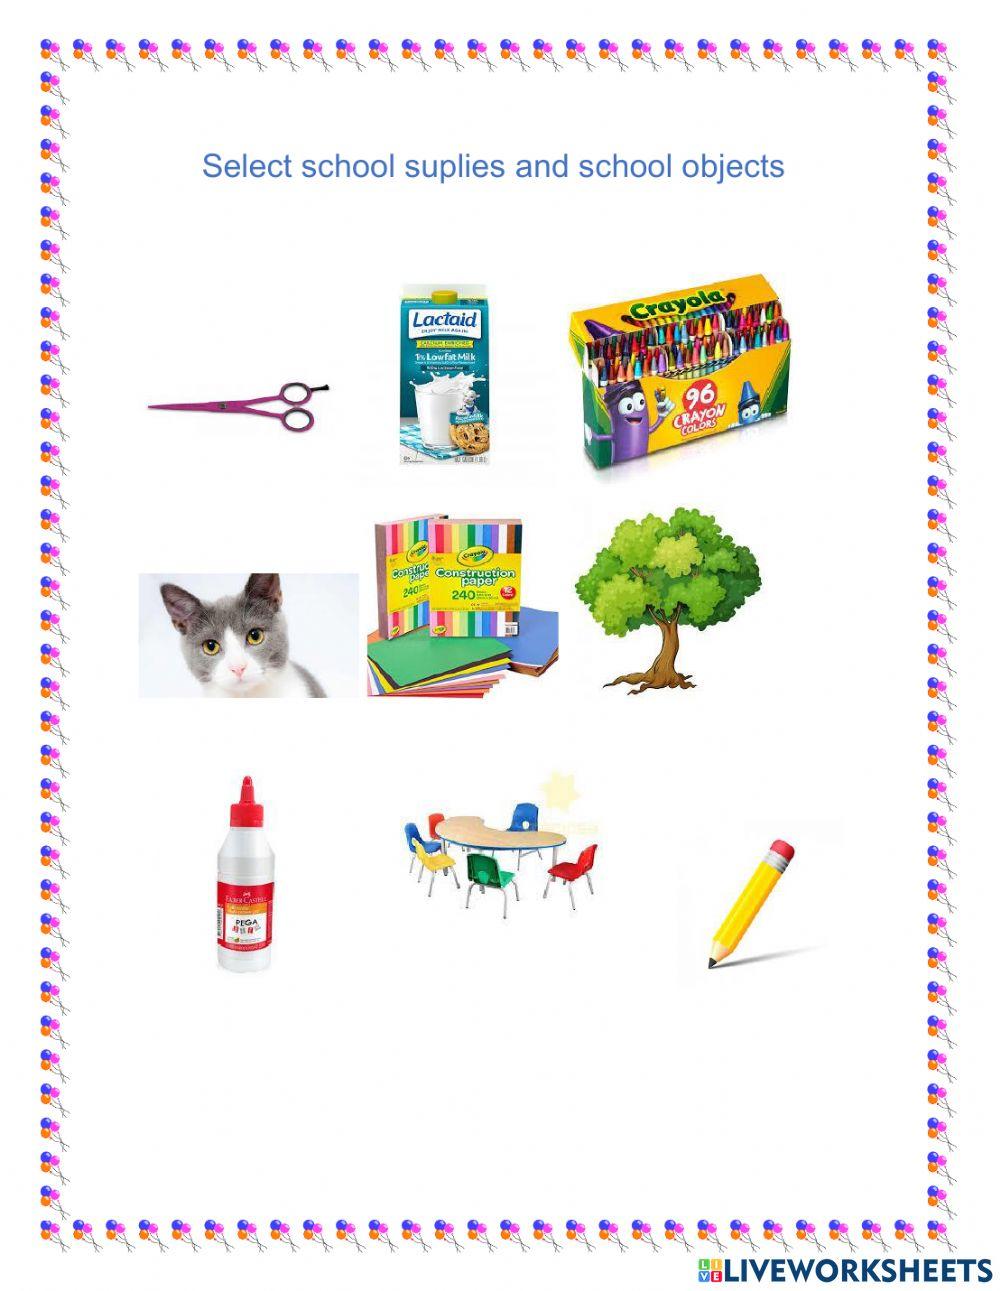 Watch Video and select school supplies and objects